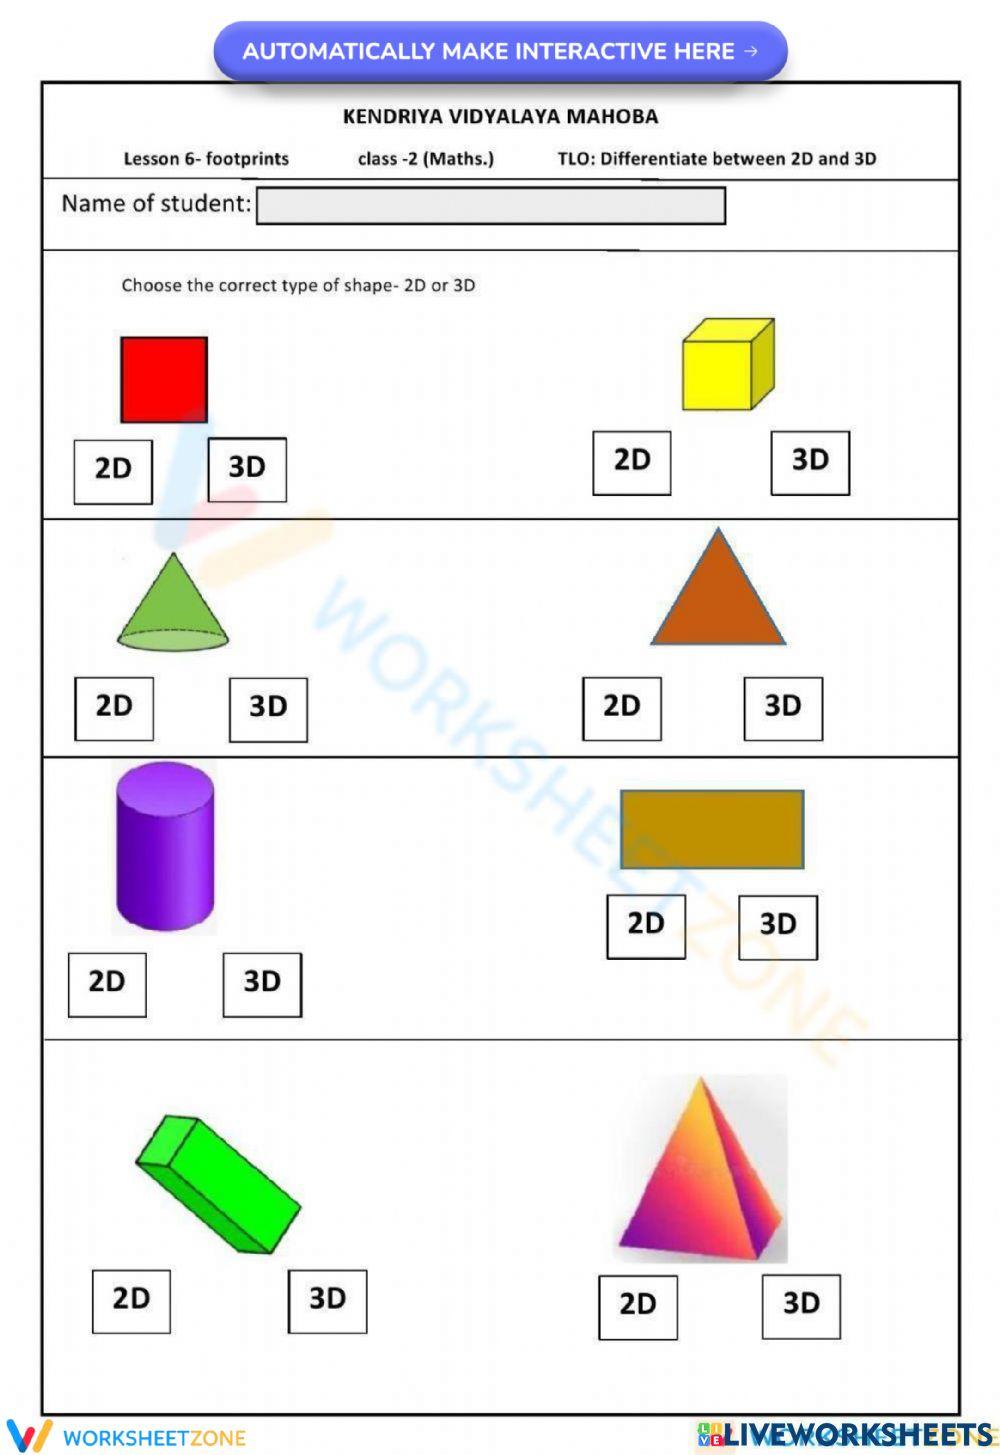 Difference between 2d and 3d shapes